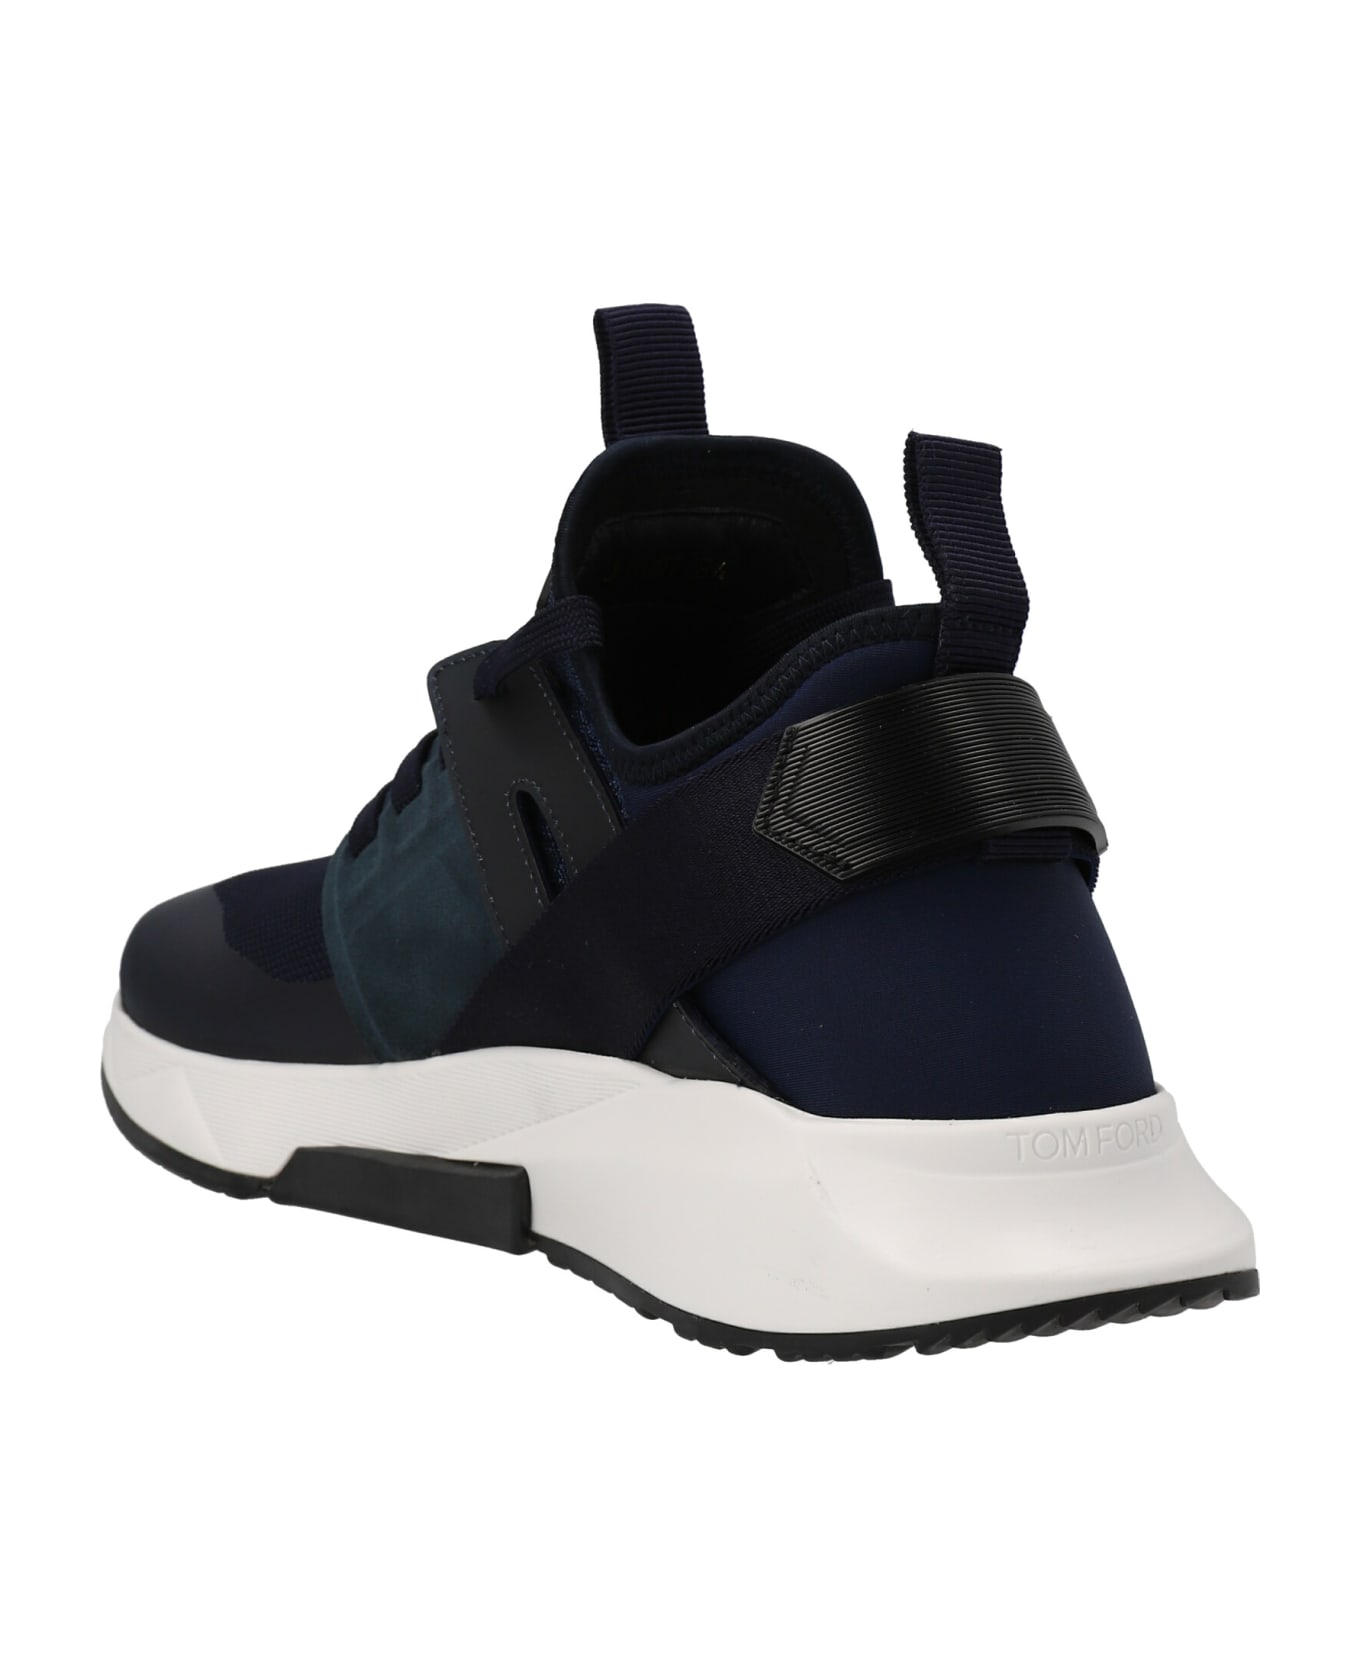 Tom Ford Multimaterial Logo Sneakers - Blue